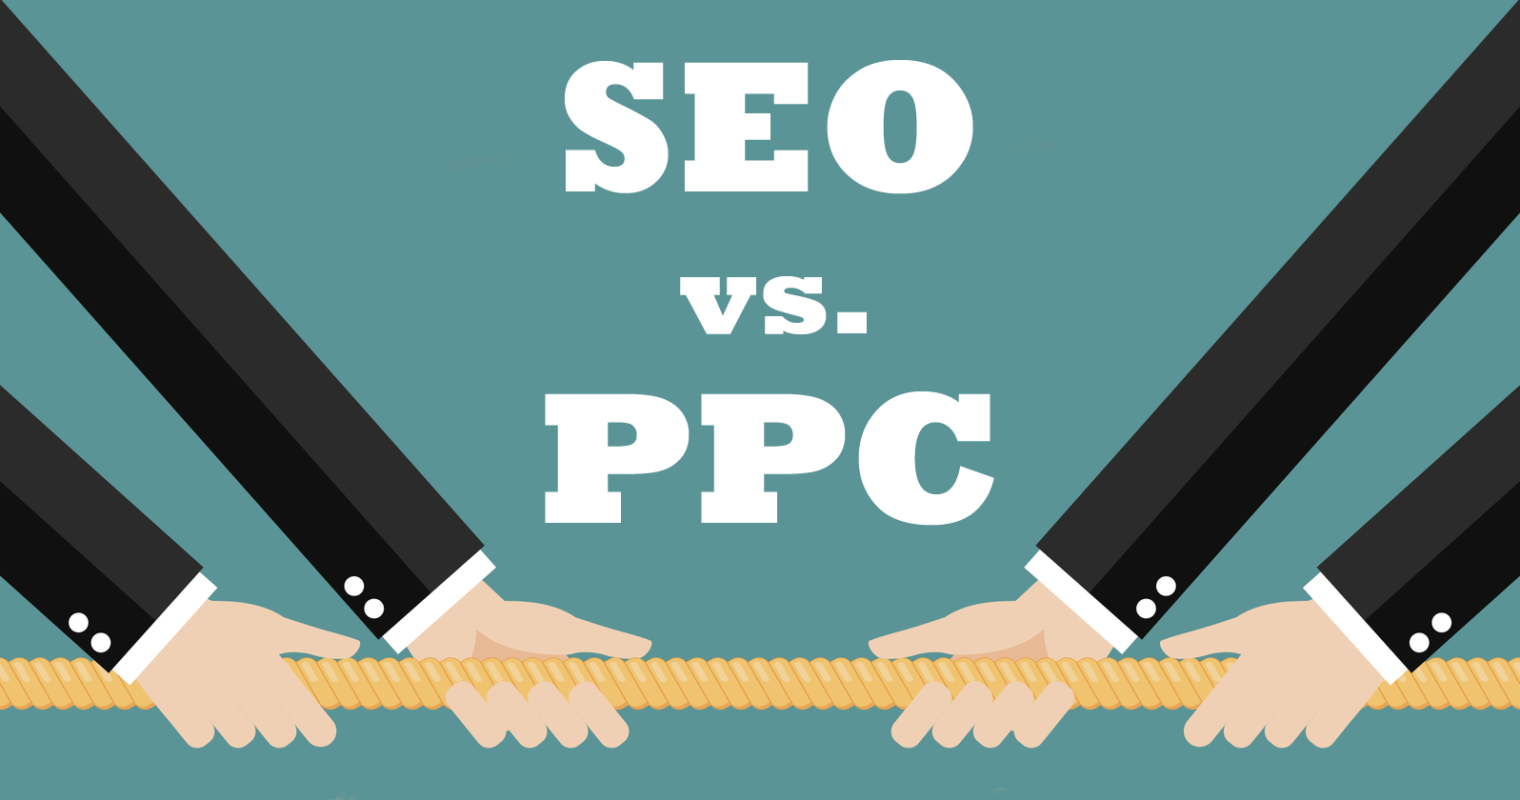 Why is seo better than ppc? find the correct answer